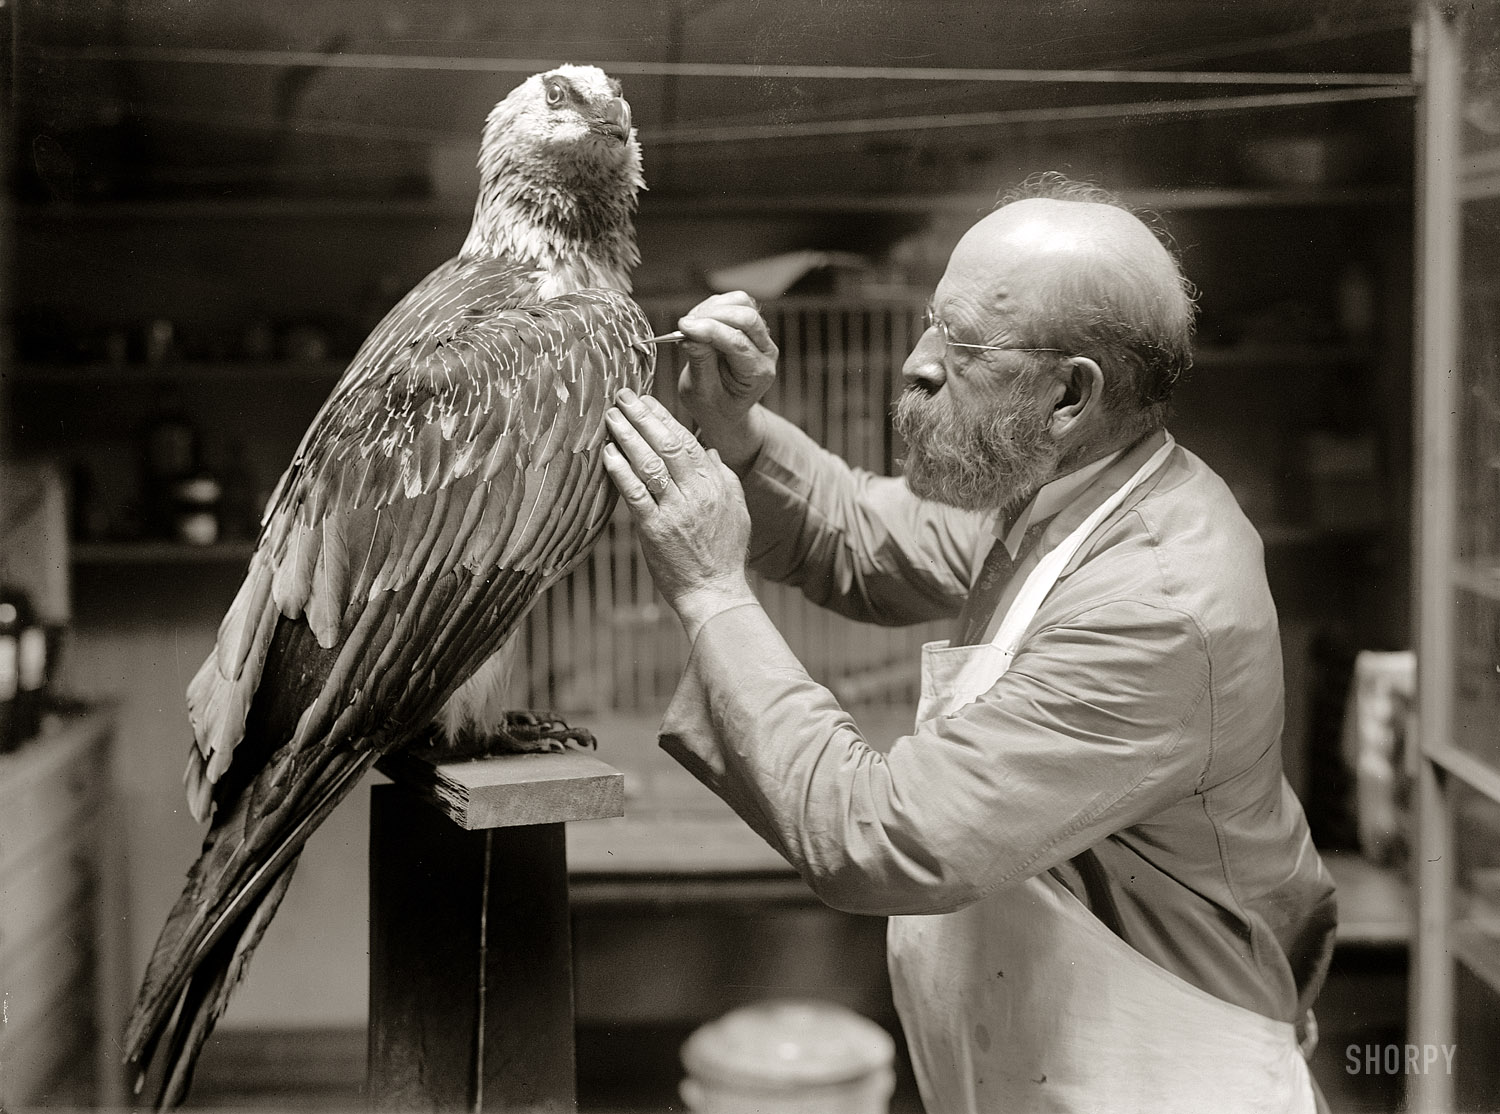 1916. "N.R. Wood of Smithsonian Institution mounting birds." Our second look at Nelson Wood in his natural habitat. Harris & Ewing glass neg. View full size.